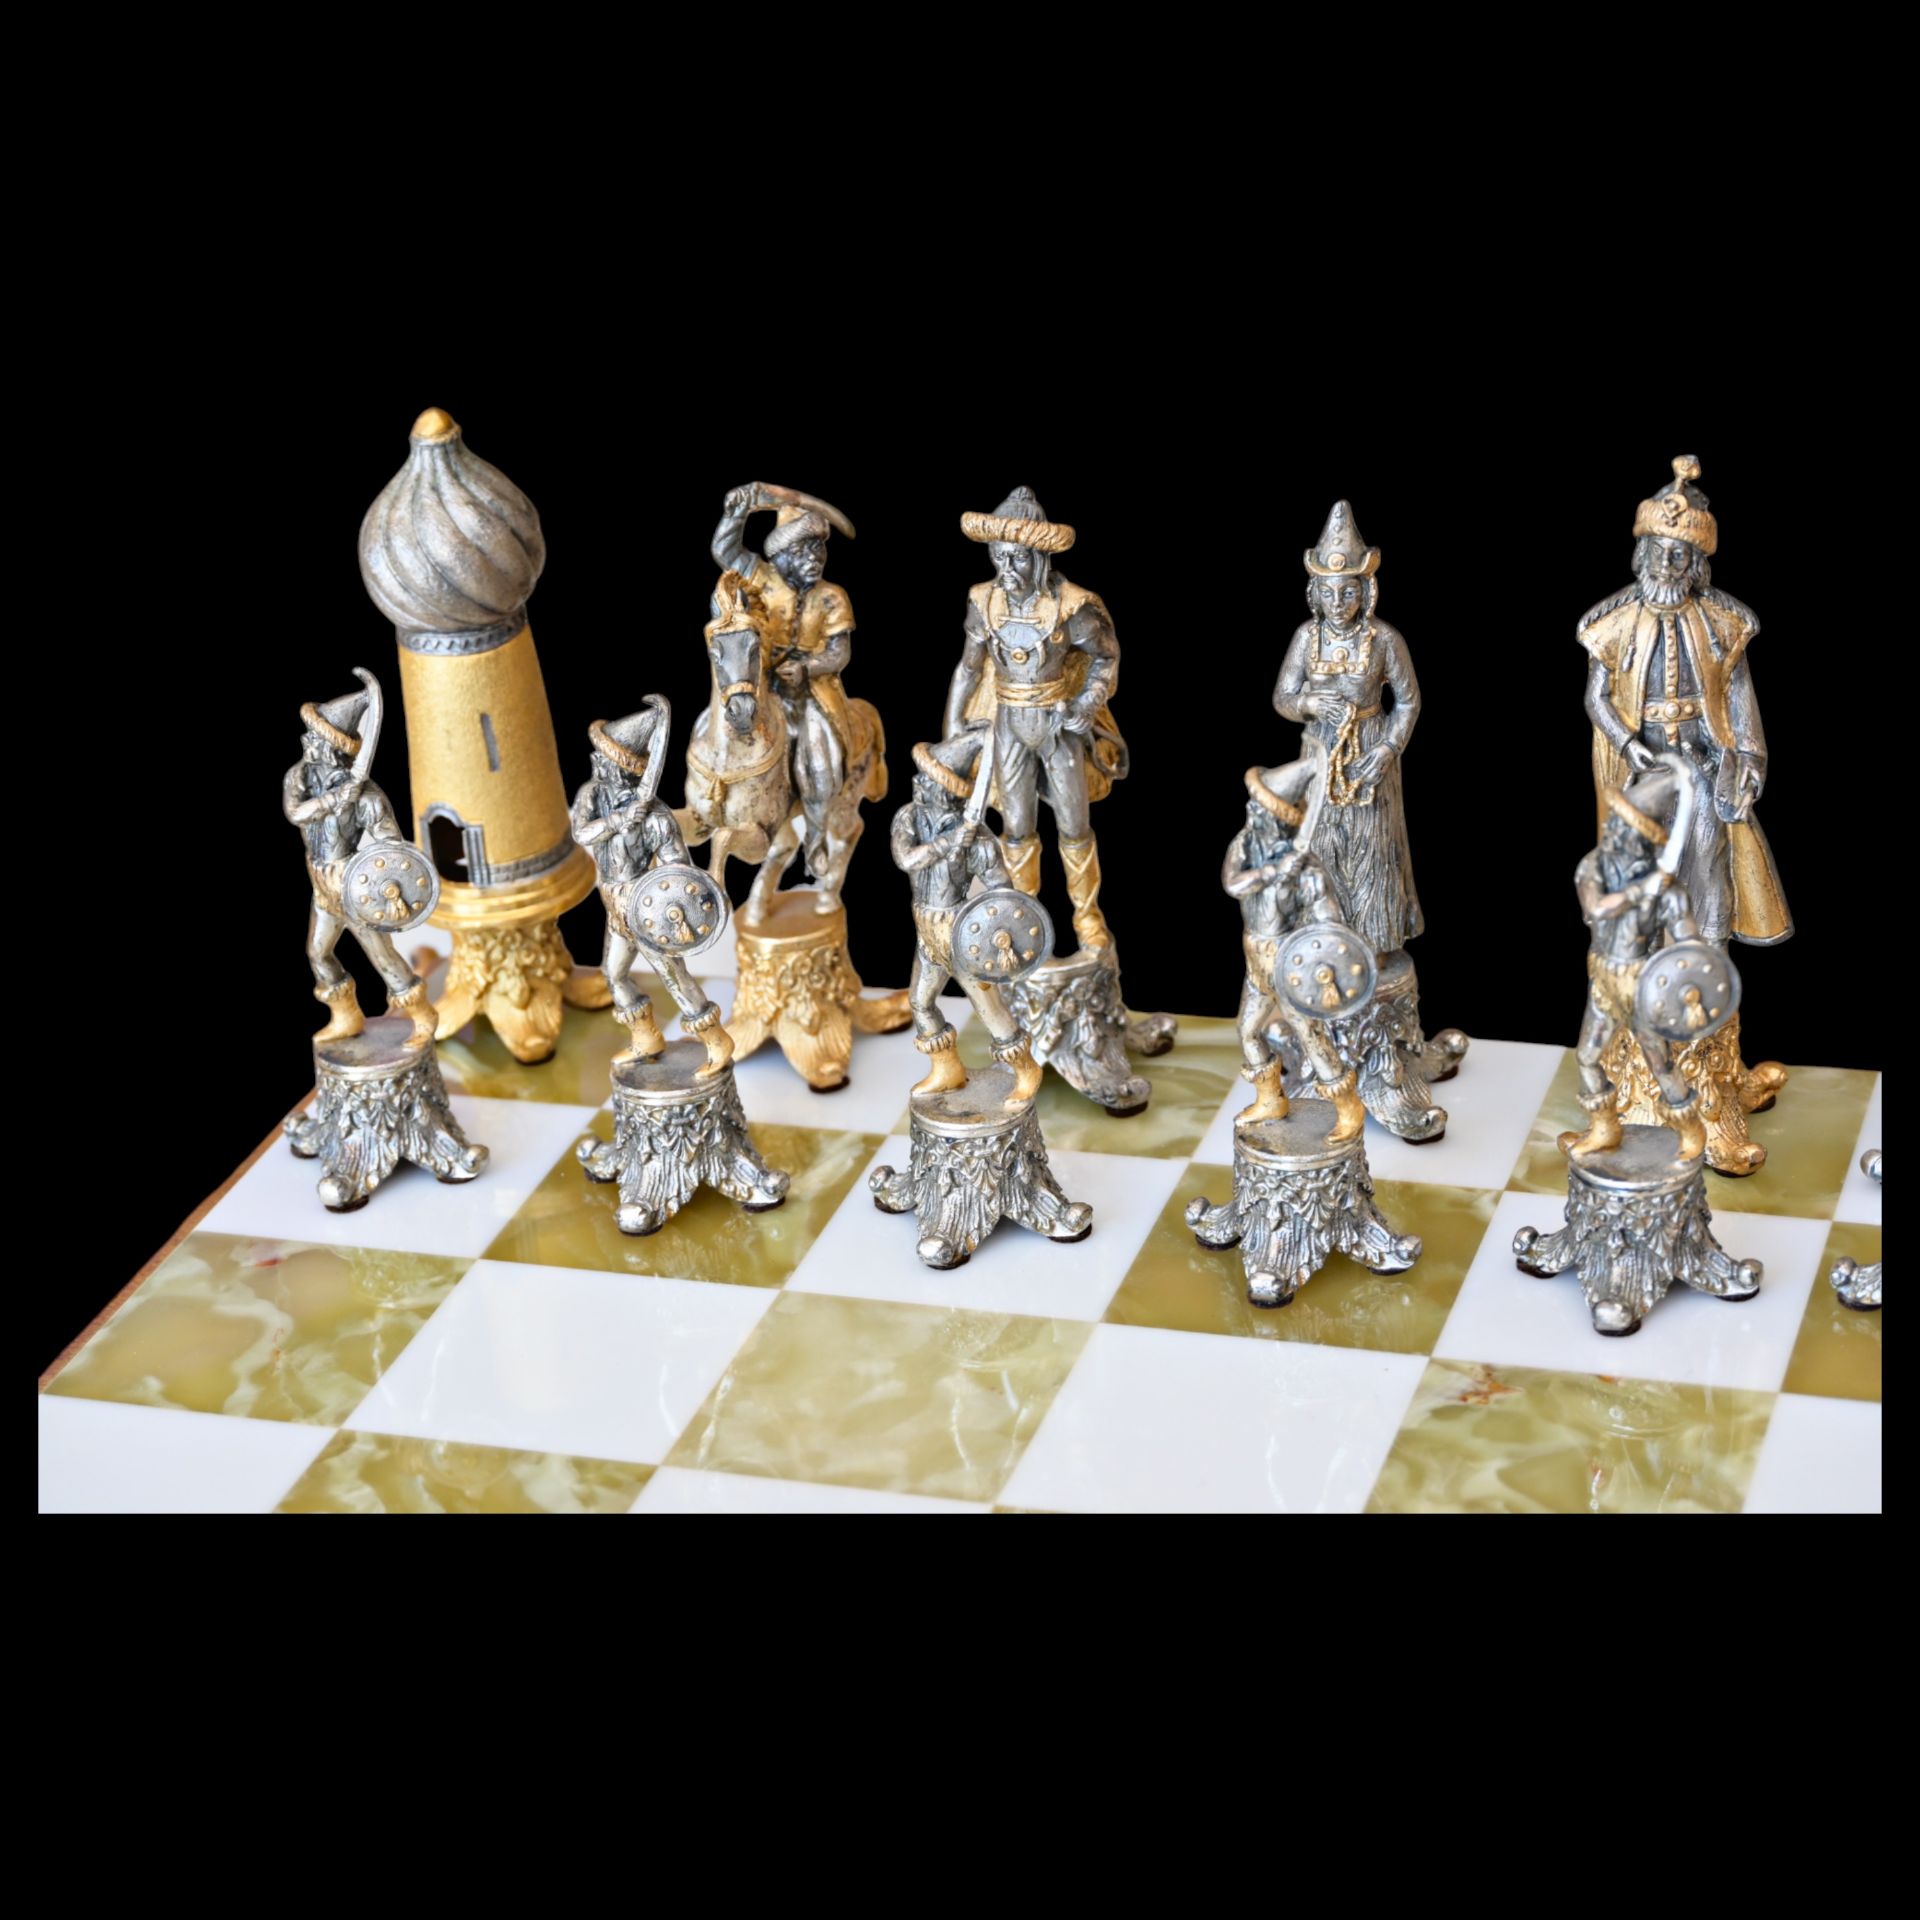 Piero Benzoni Onyx and Marble Silver-Plated and Gilt Bronze Chess Set, 70-80 years of the 20th _. - Bild 4 aus 13